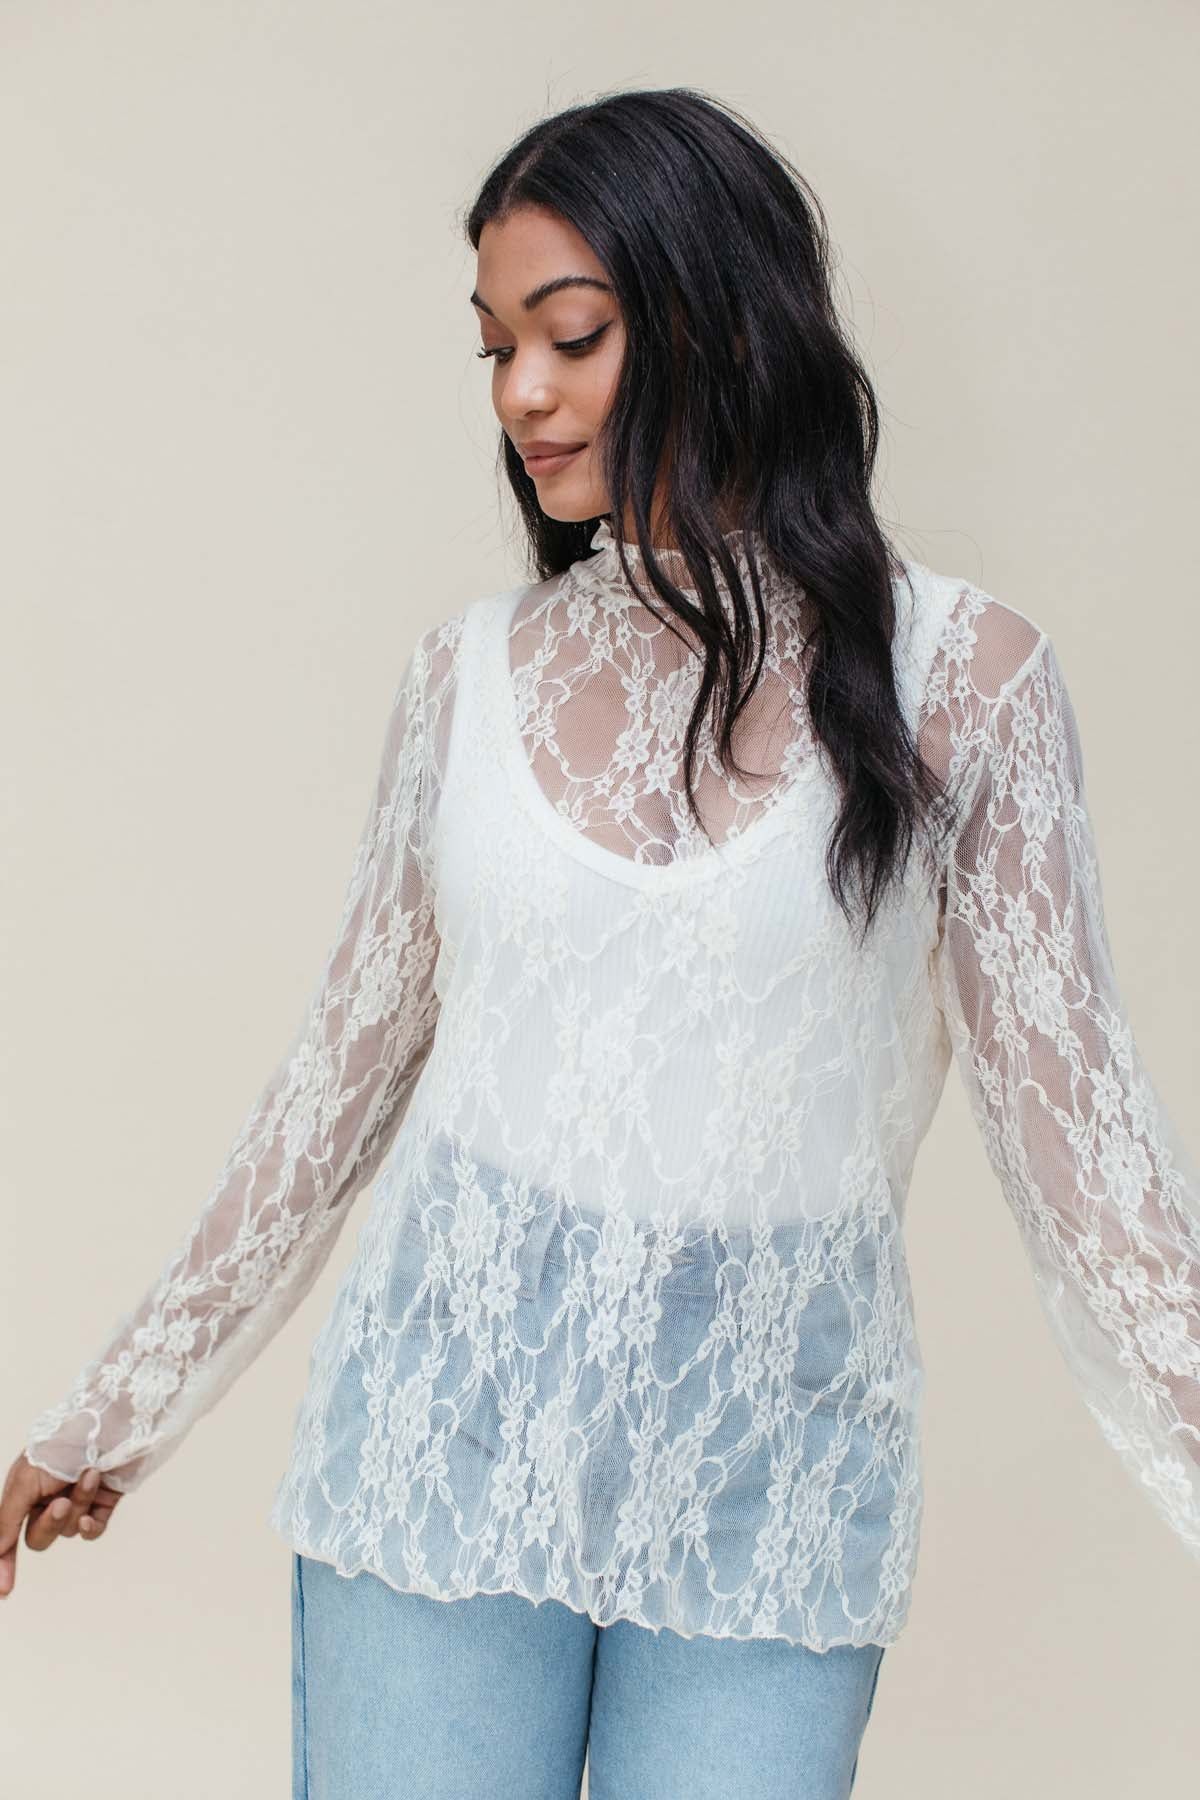 Zoe White Lace Top | The Post